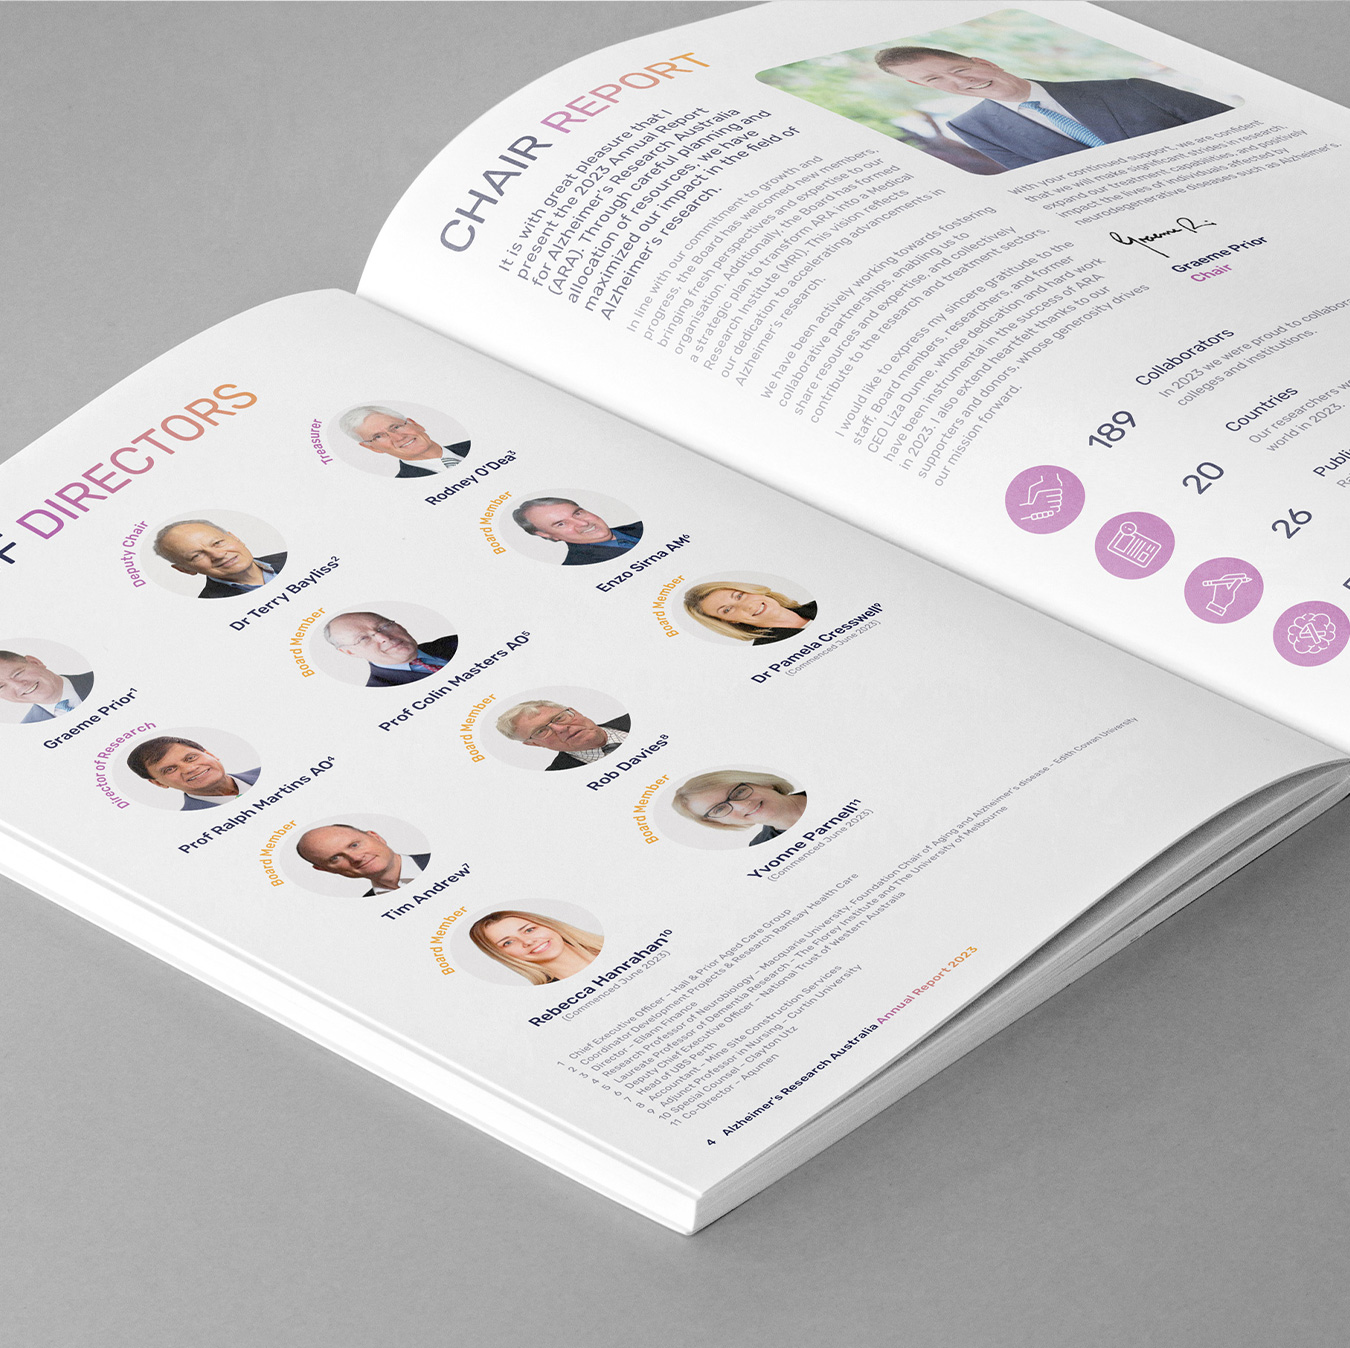 Alzheimer's Research Australia Graphic Design, Merchandise and Signage and Annual Report Design and Development by TL Design Co.